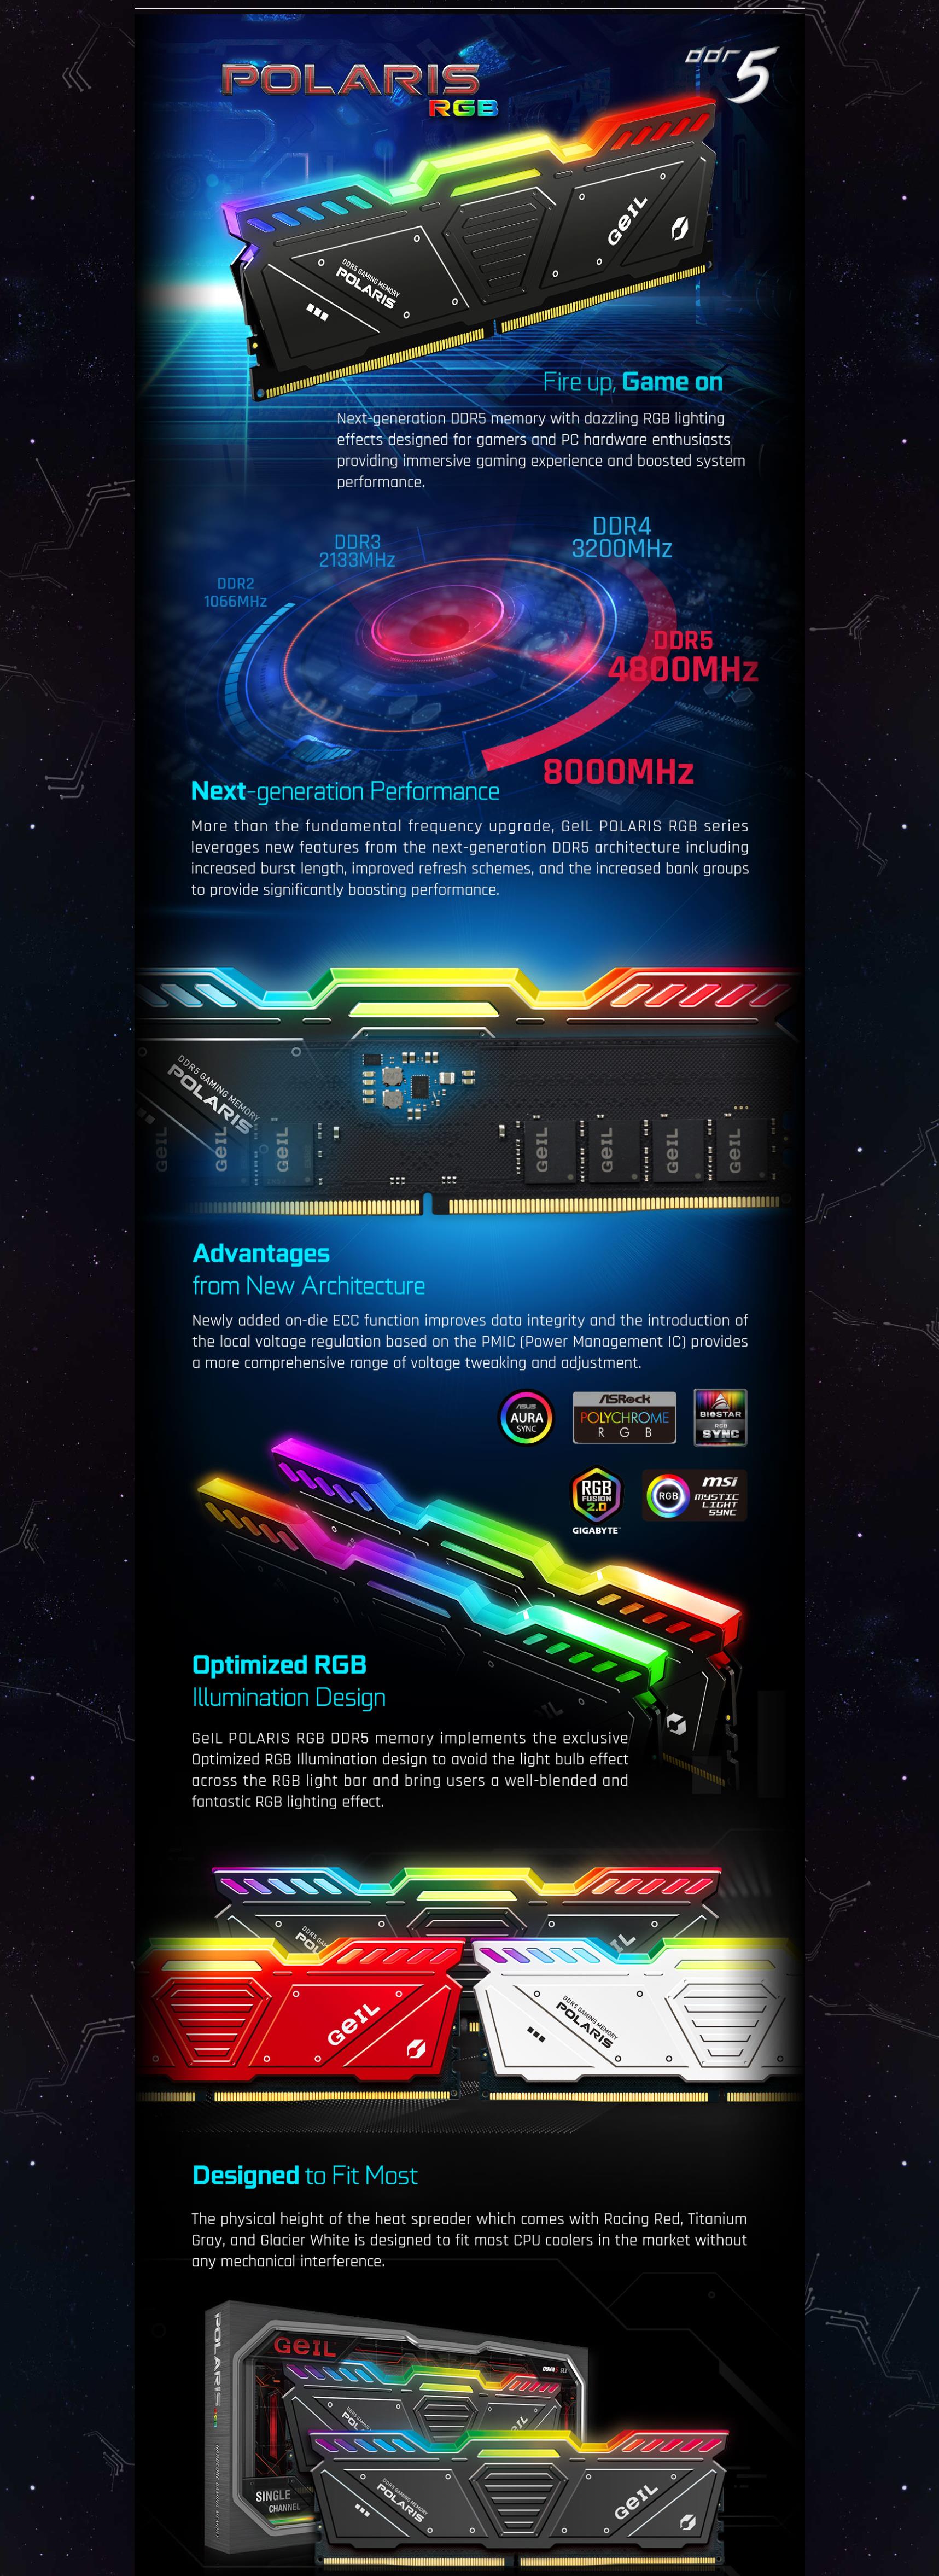 A large marketing image providing additional information about the product GeIL 32GB Kit (2x16GB) DDR5 Polaris AMD Edition RGB C38 5600MHz - Grey - Additional alt info not provided